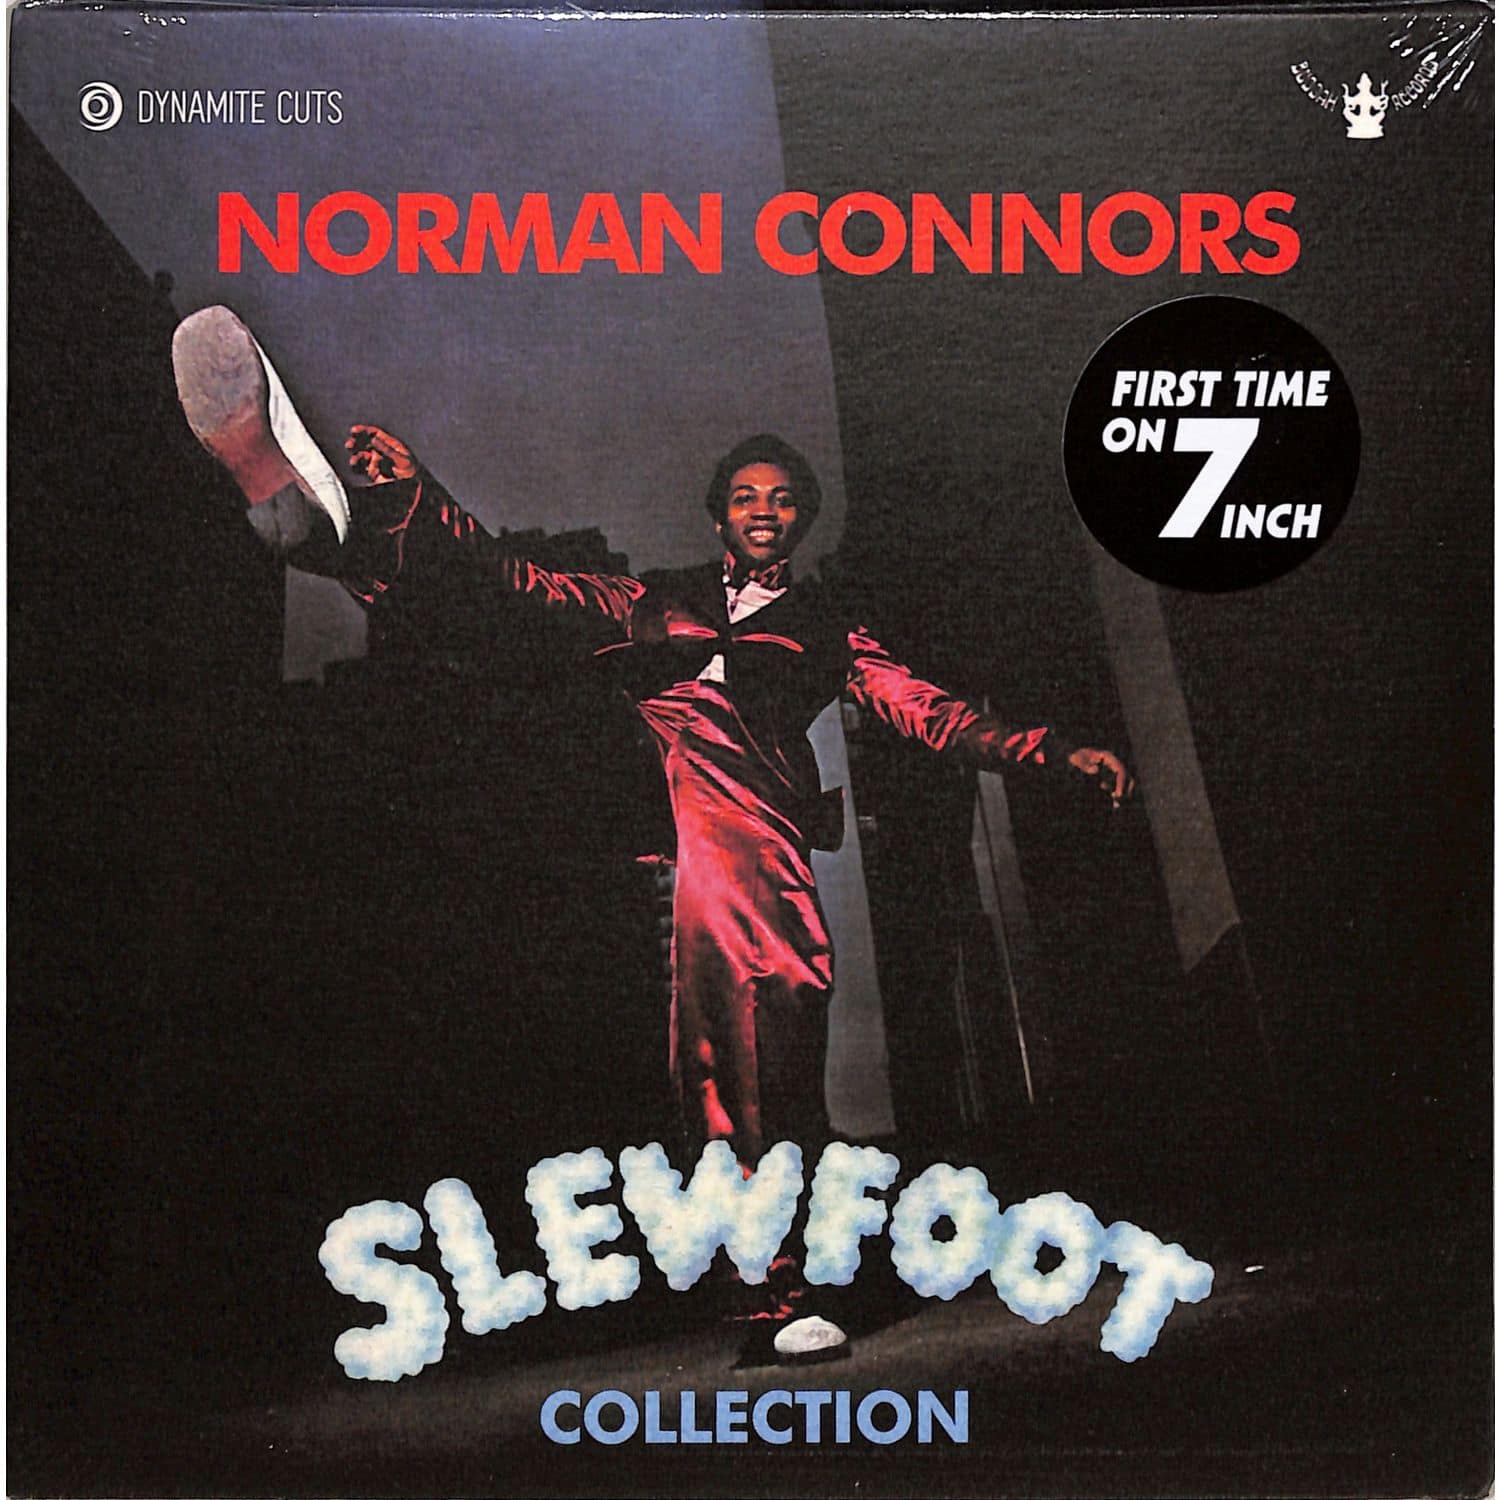 Norman Connors - SLEWFOOT 45s COLLECTION 